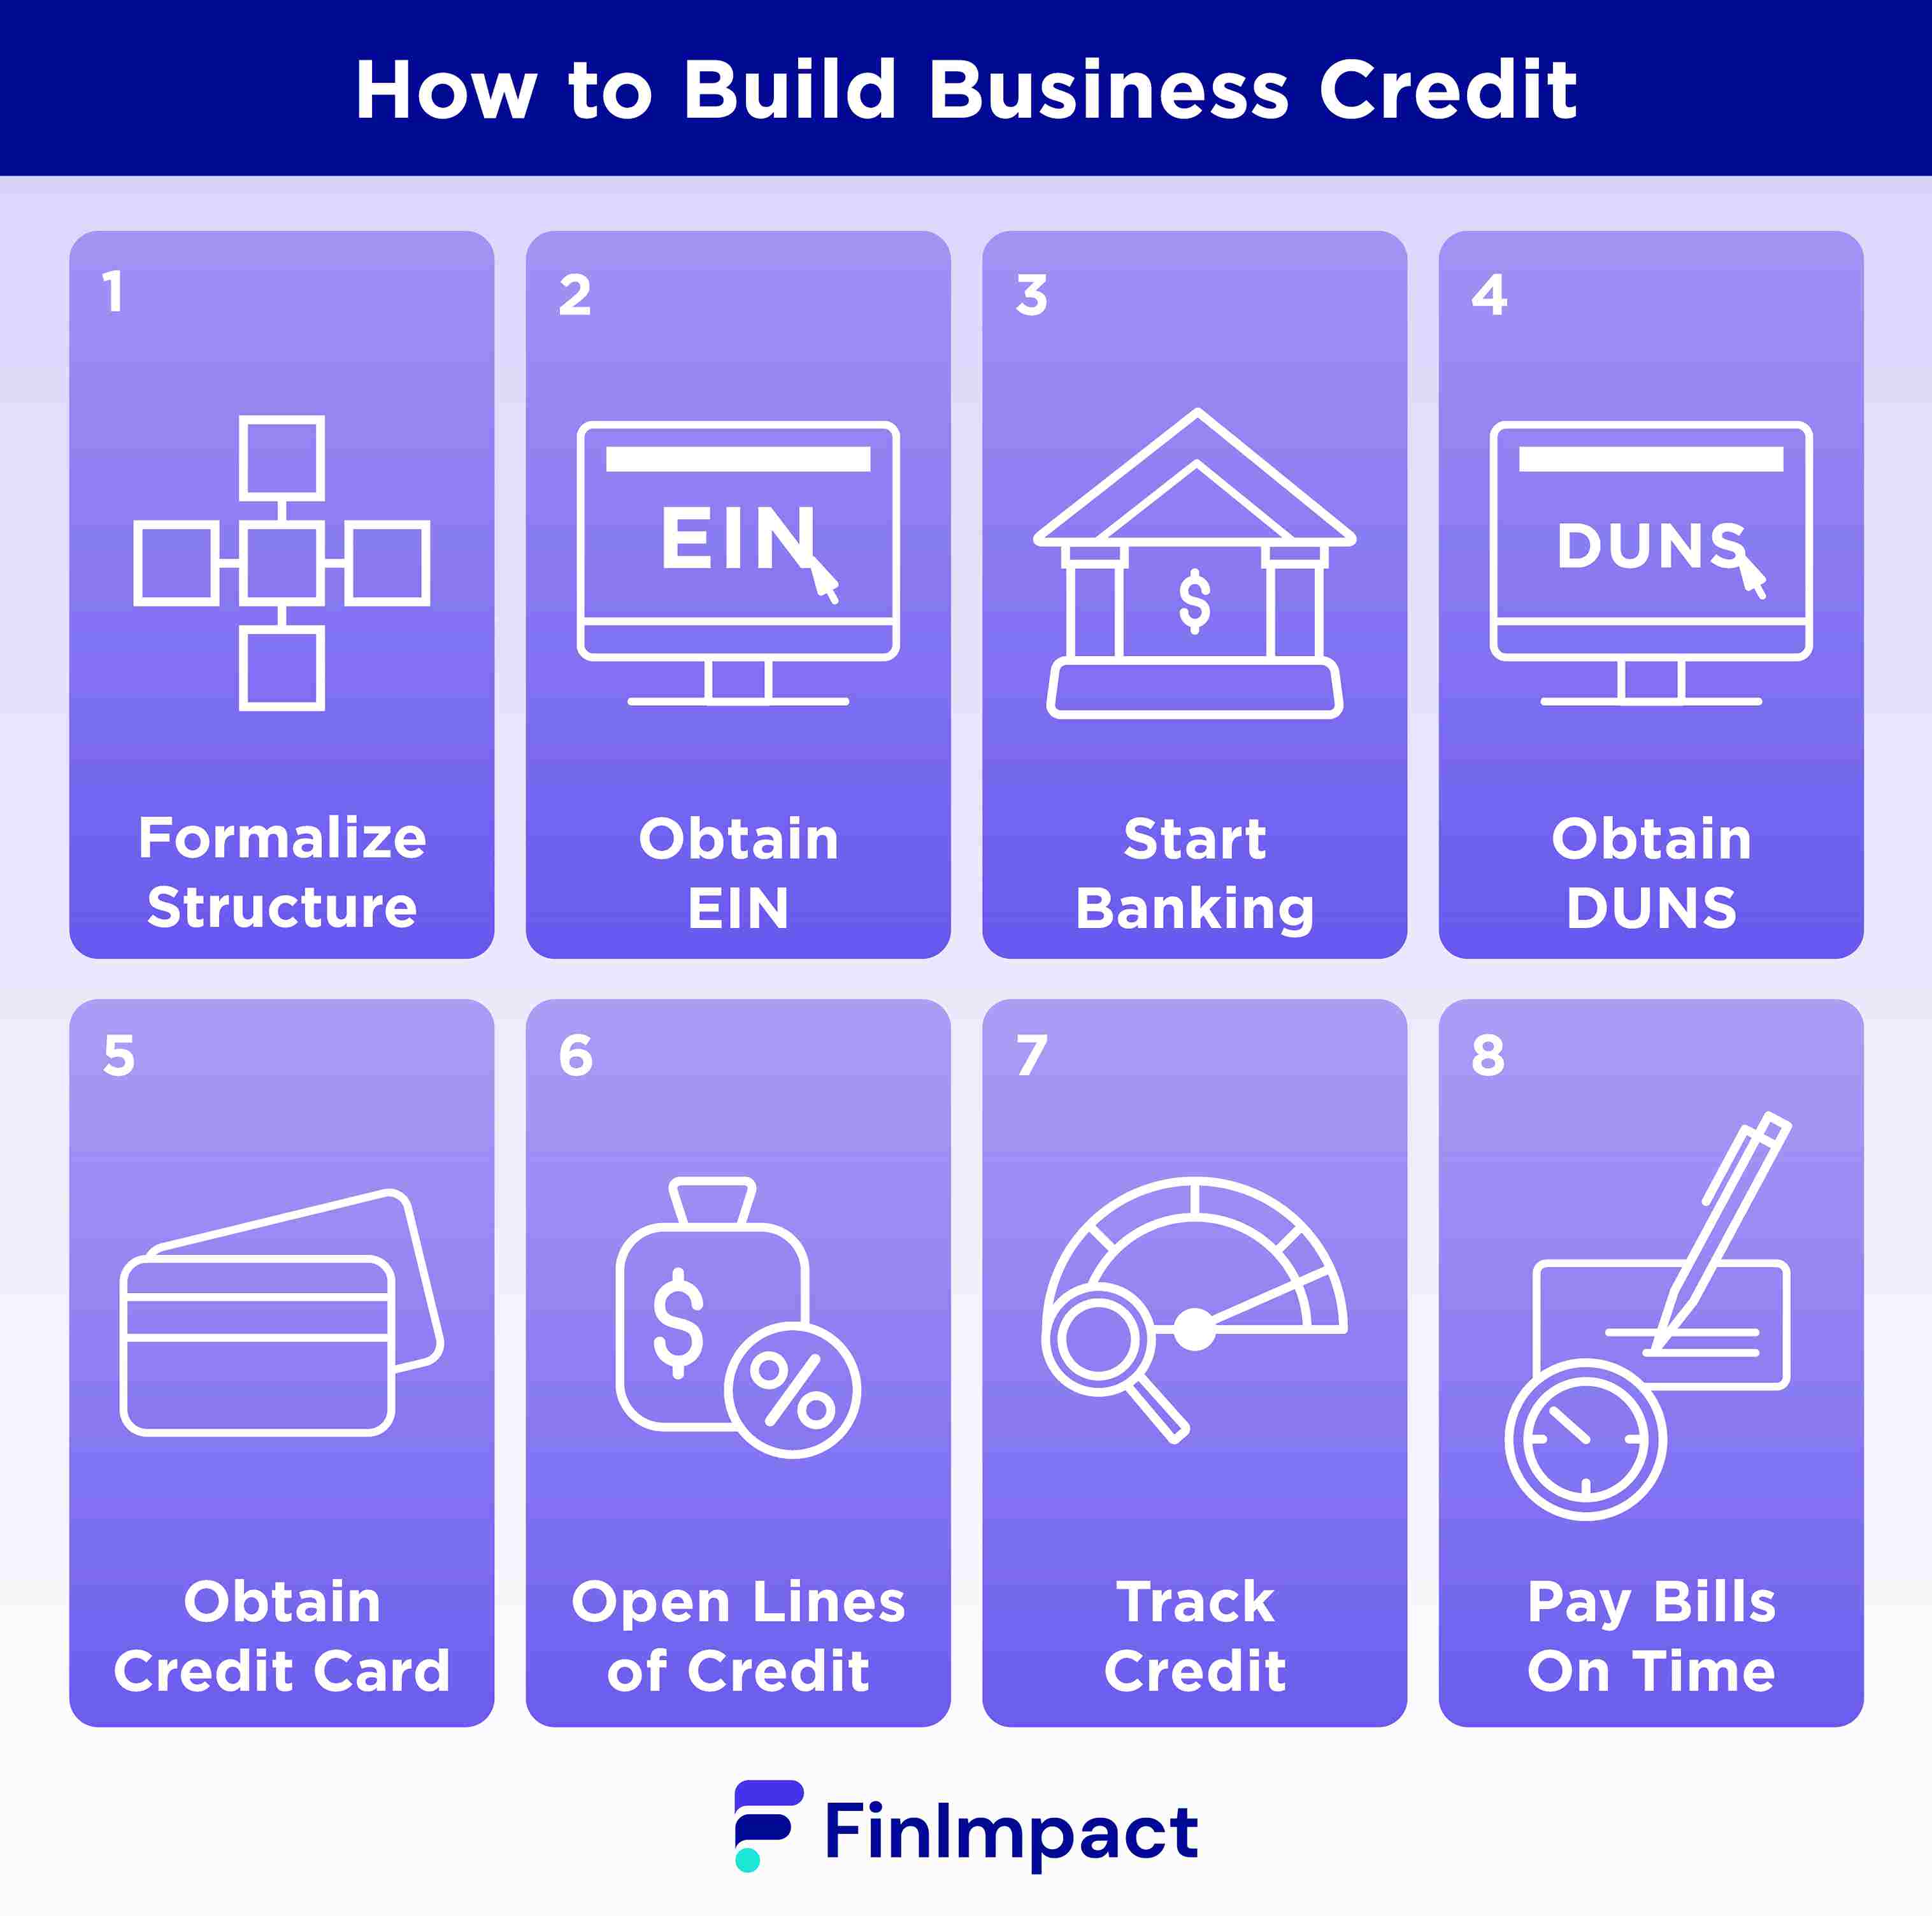 How to Build Business Credit - FinImpact.com